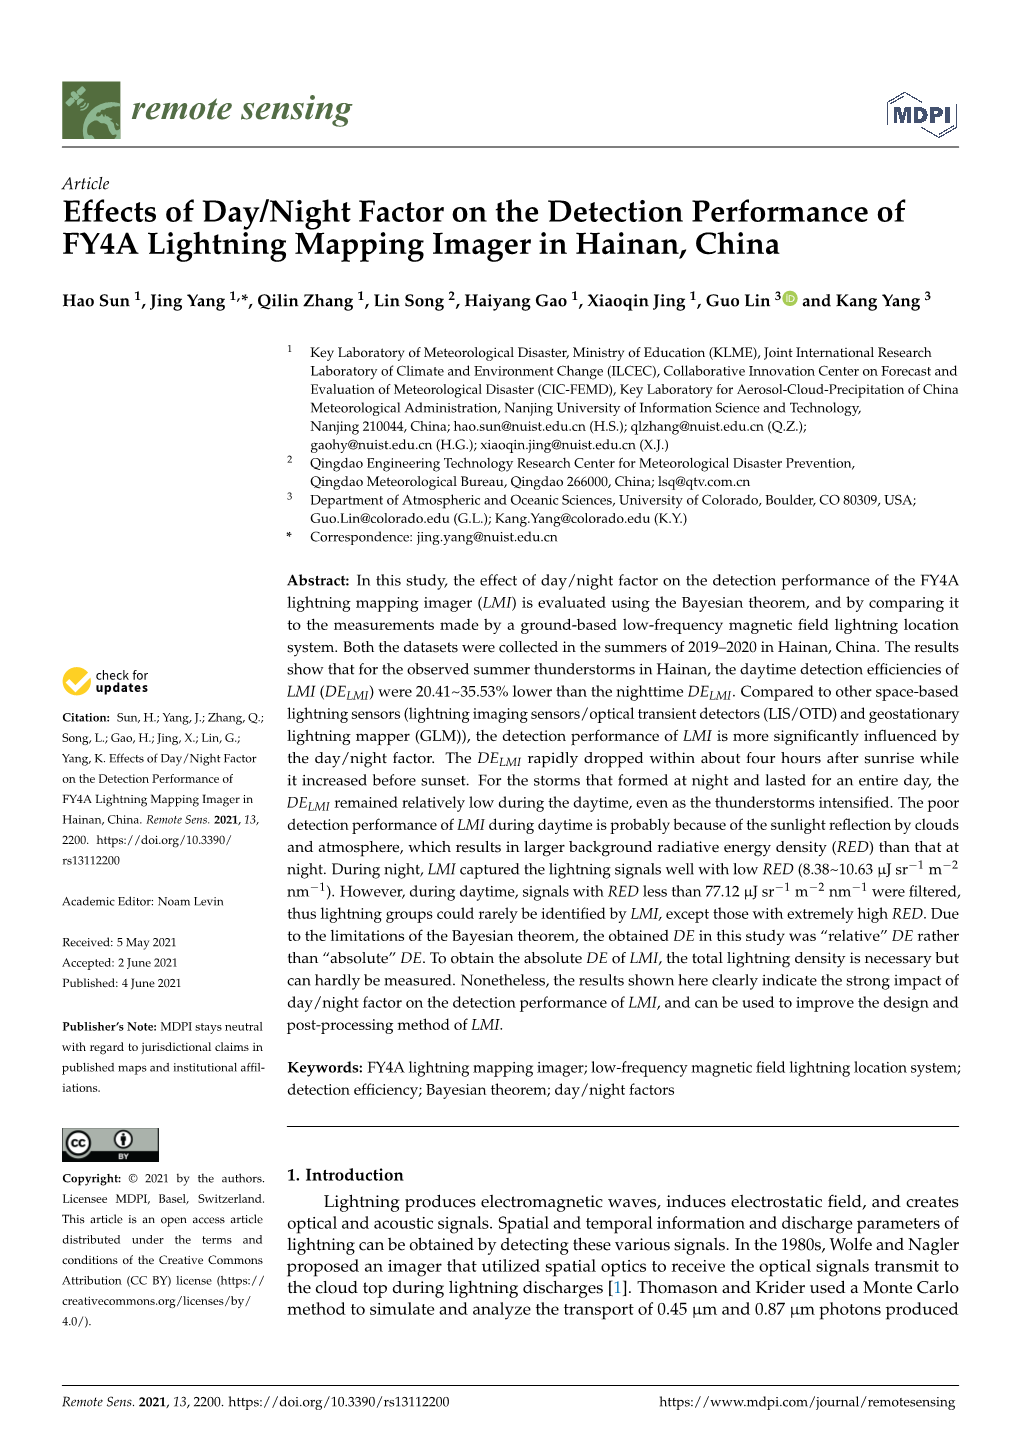 Effects of Day/Night Factor on the Detection Performance of FY4A Lightning Mapping Imager in Hainan, China